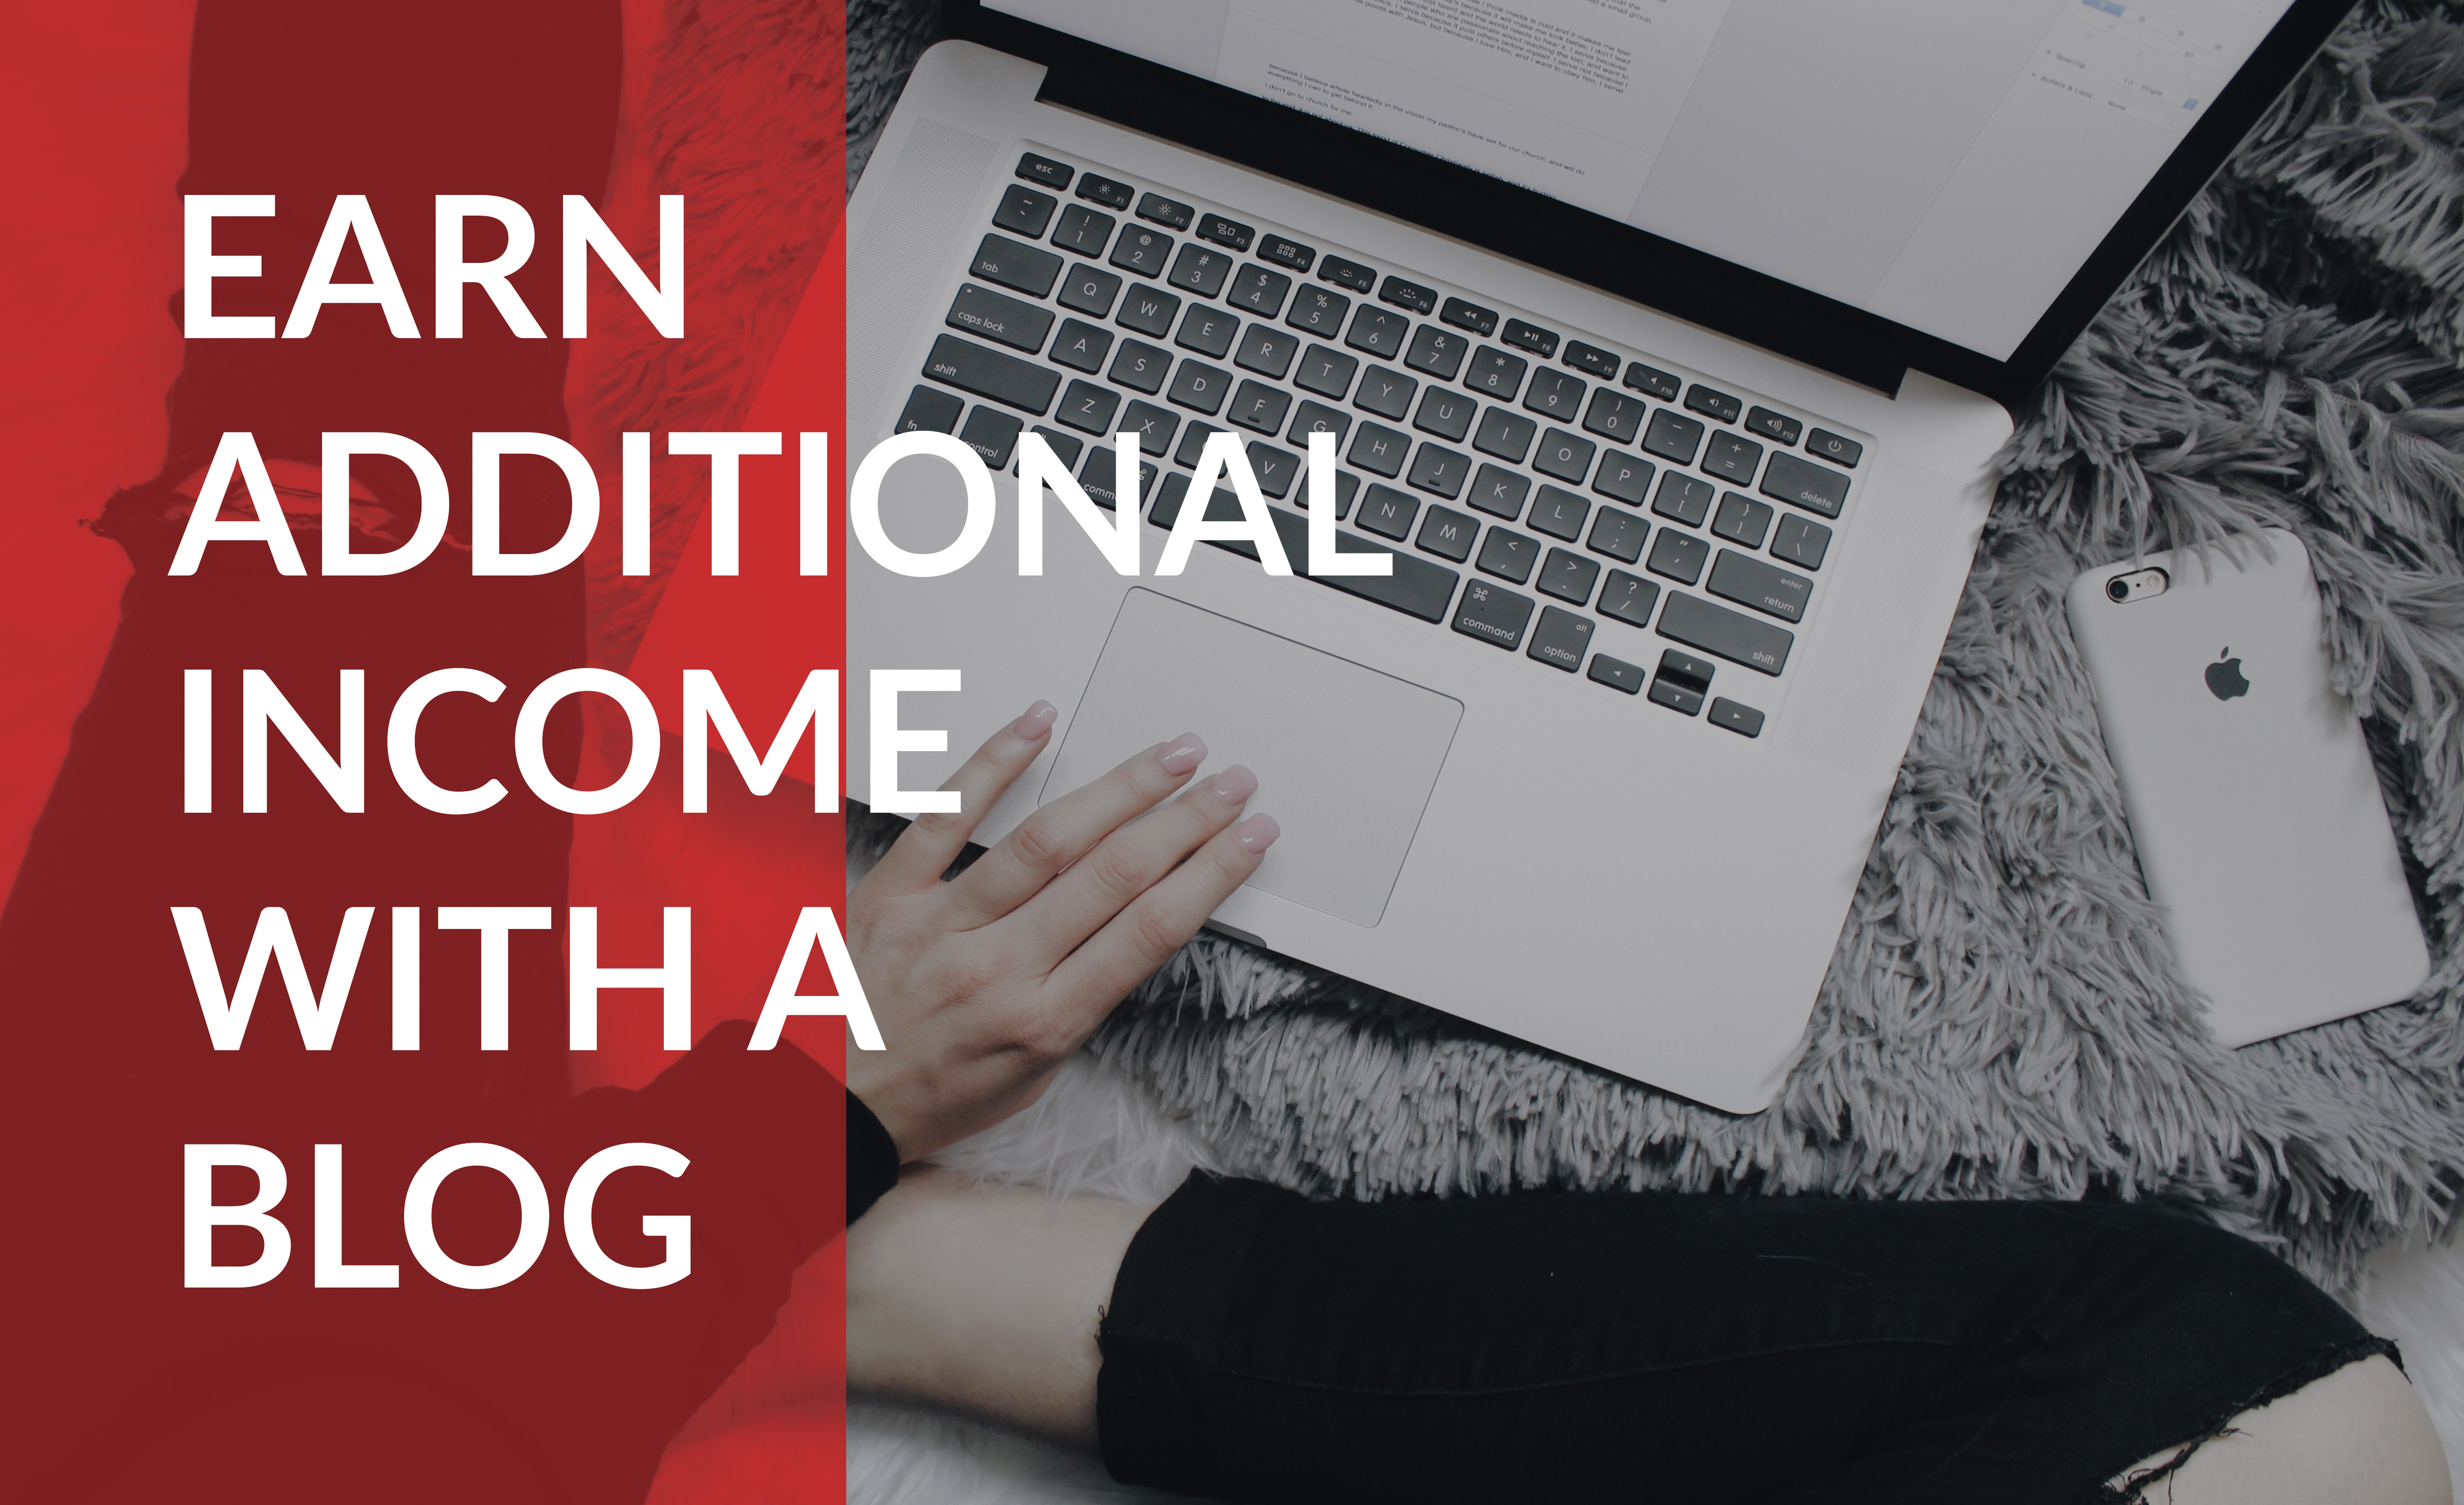 Earn additional income with a blog!